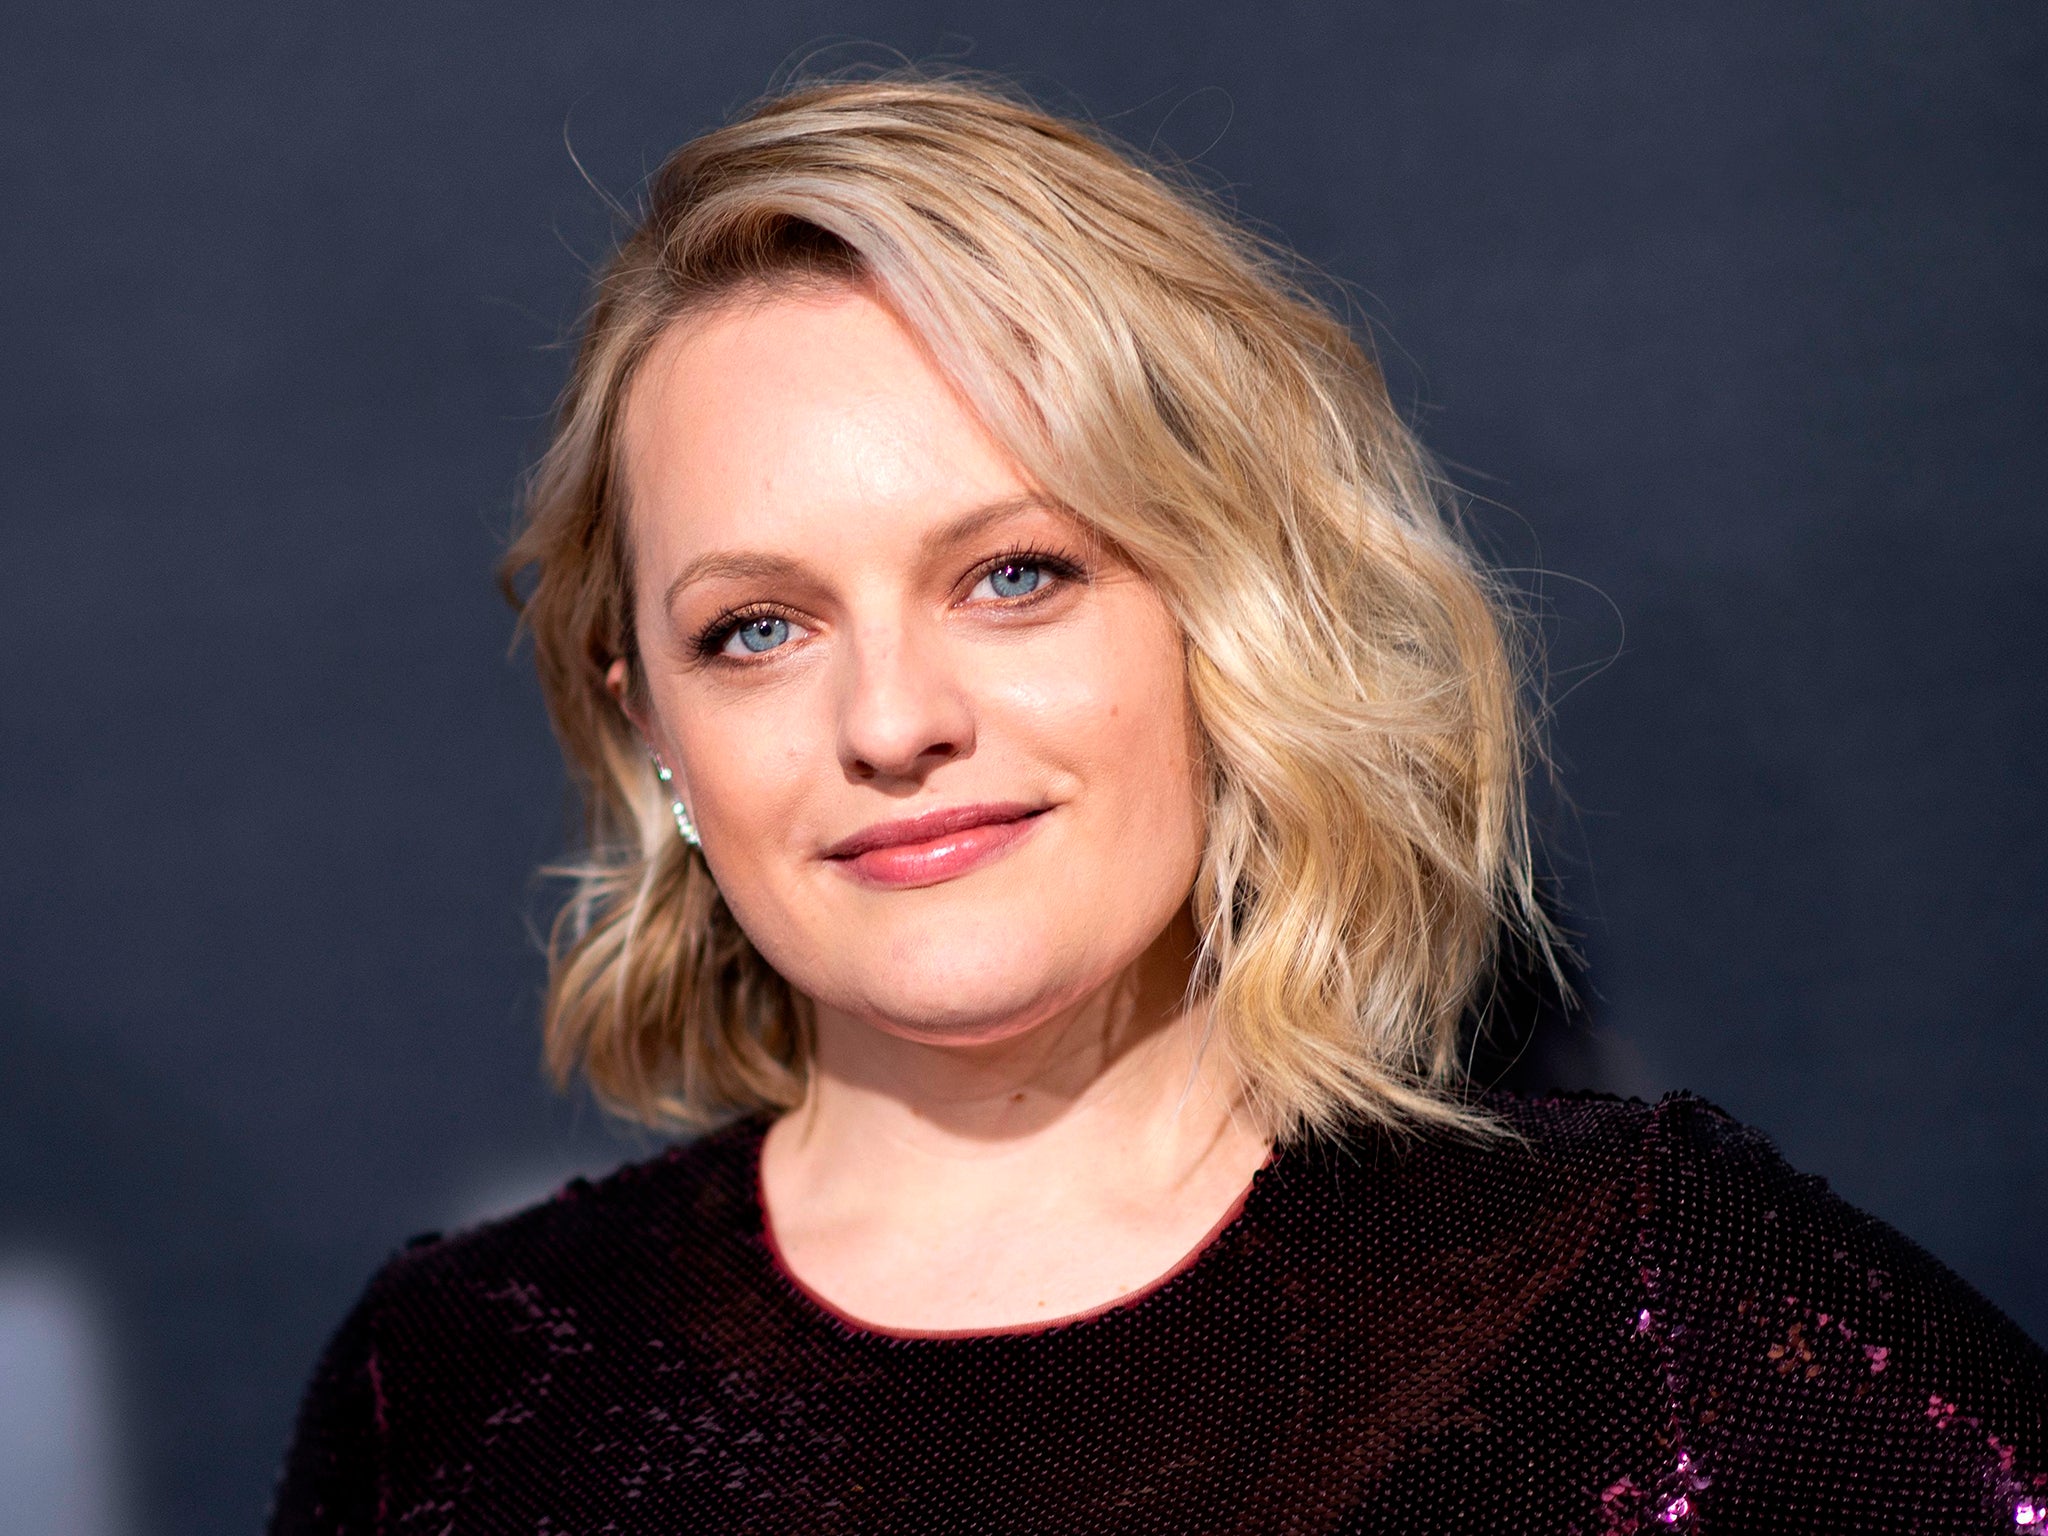 Elisabeth Moss: ‘It’s just about telling honest stories about women. That’s my guiding principle’